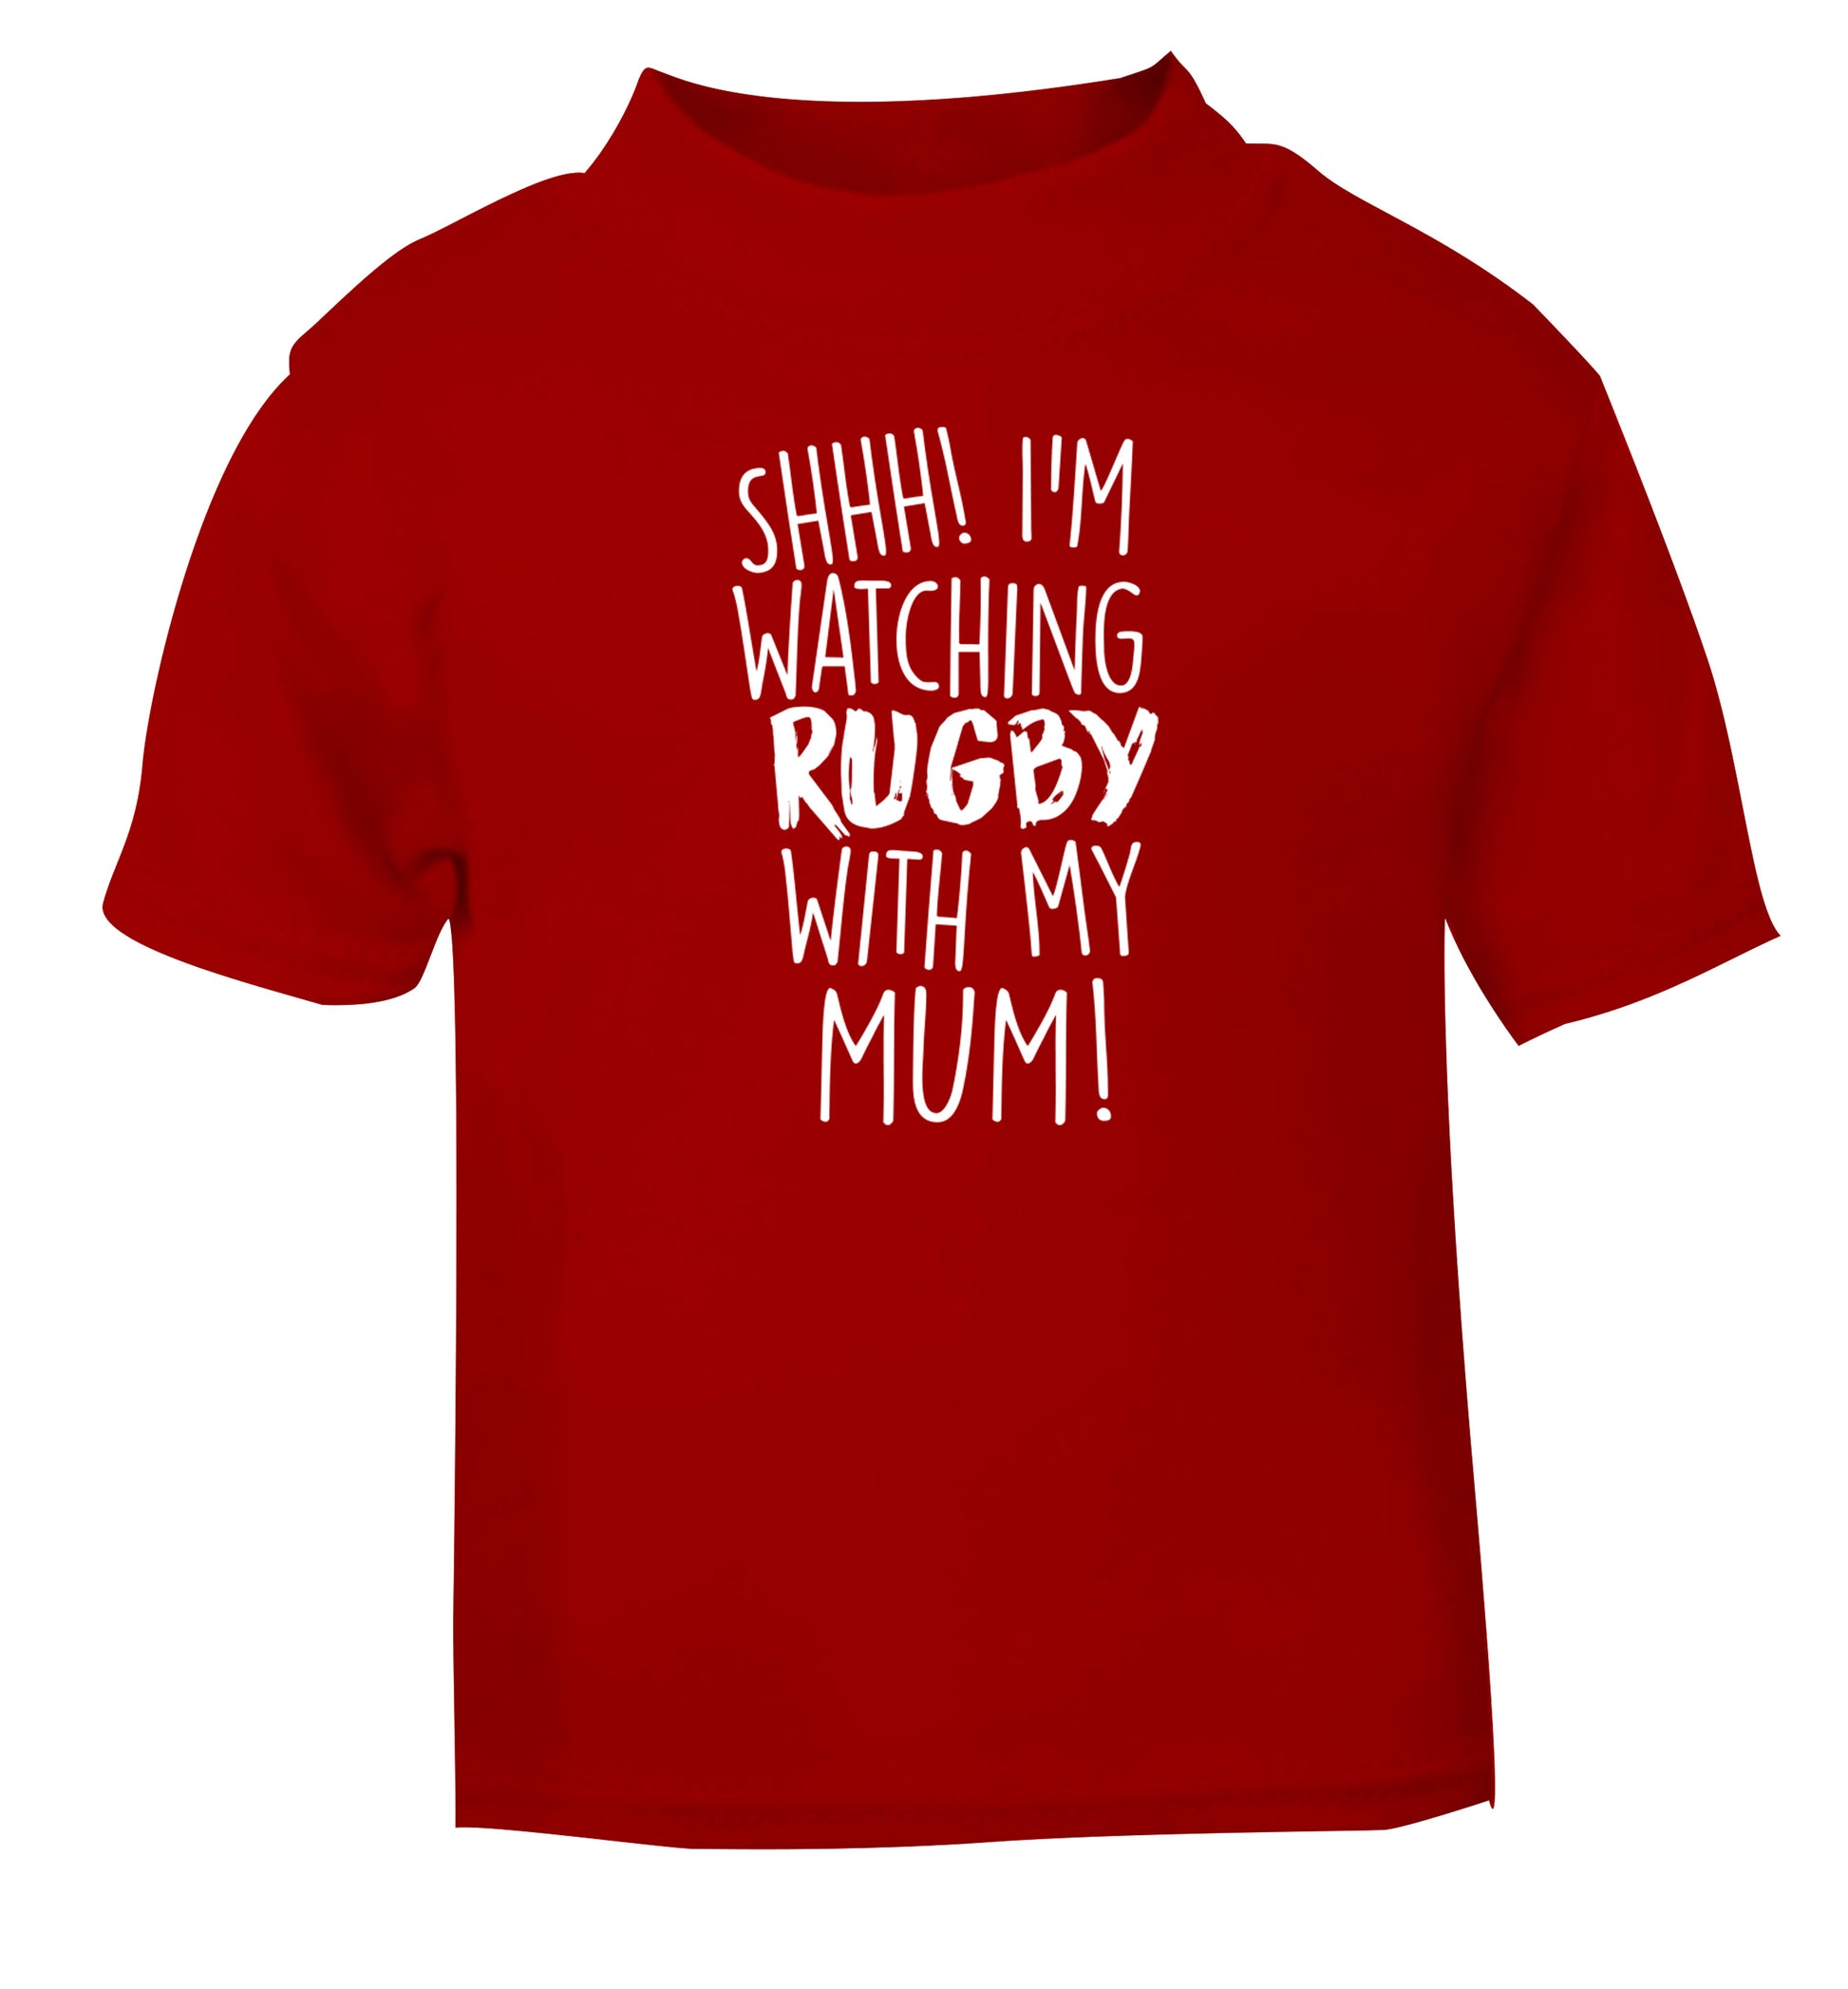 Shh... I'm watching rugby with my mum red Baby Toddler Tshirt 2 Years